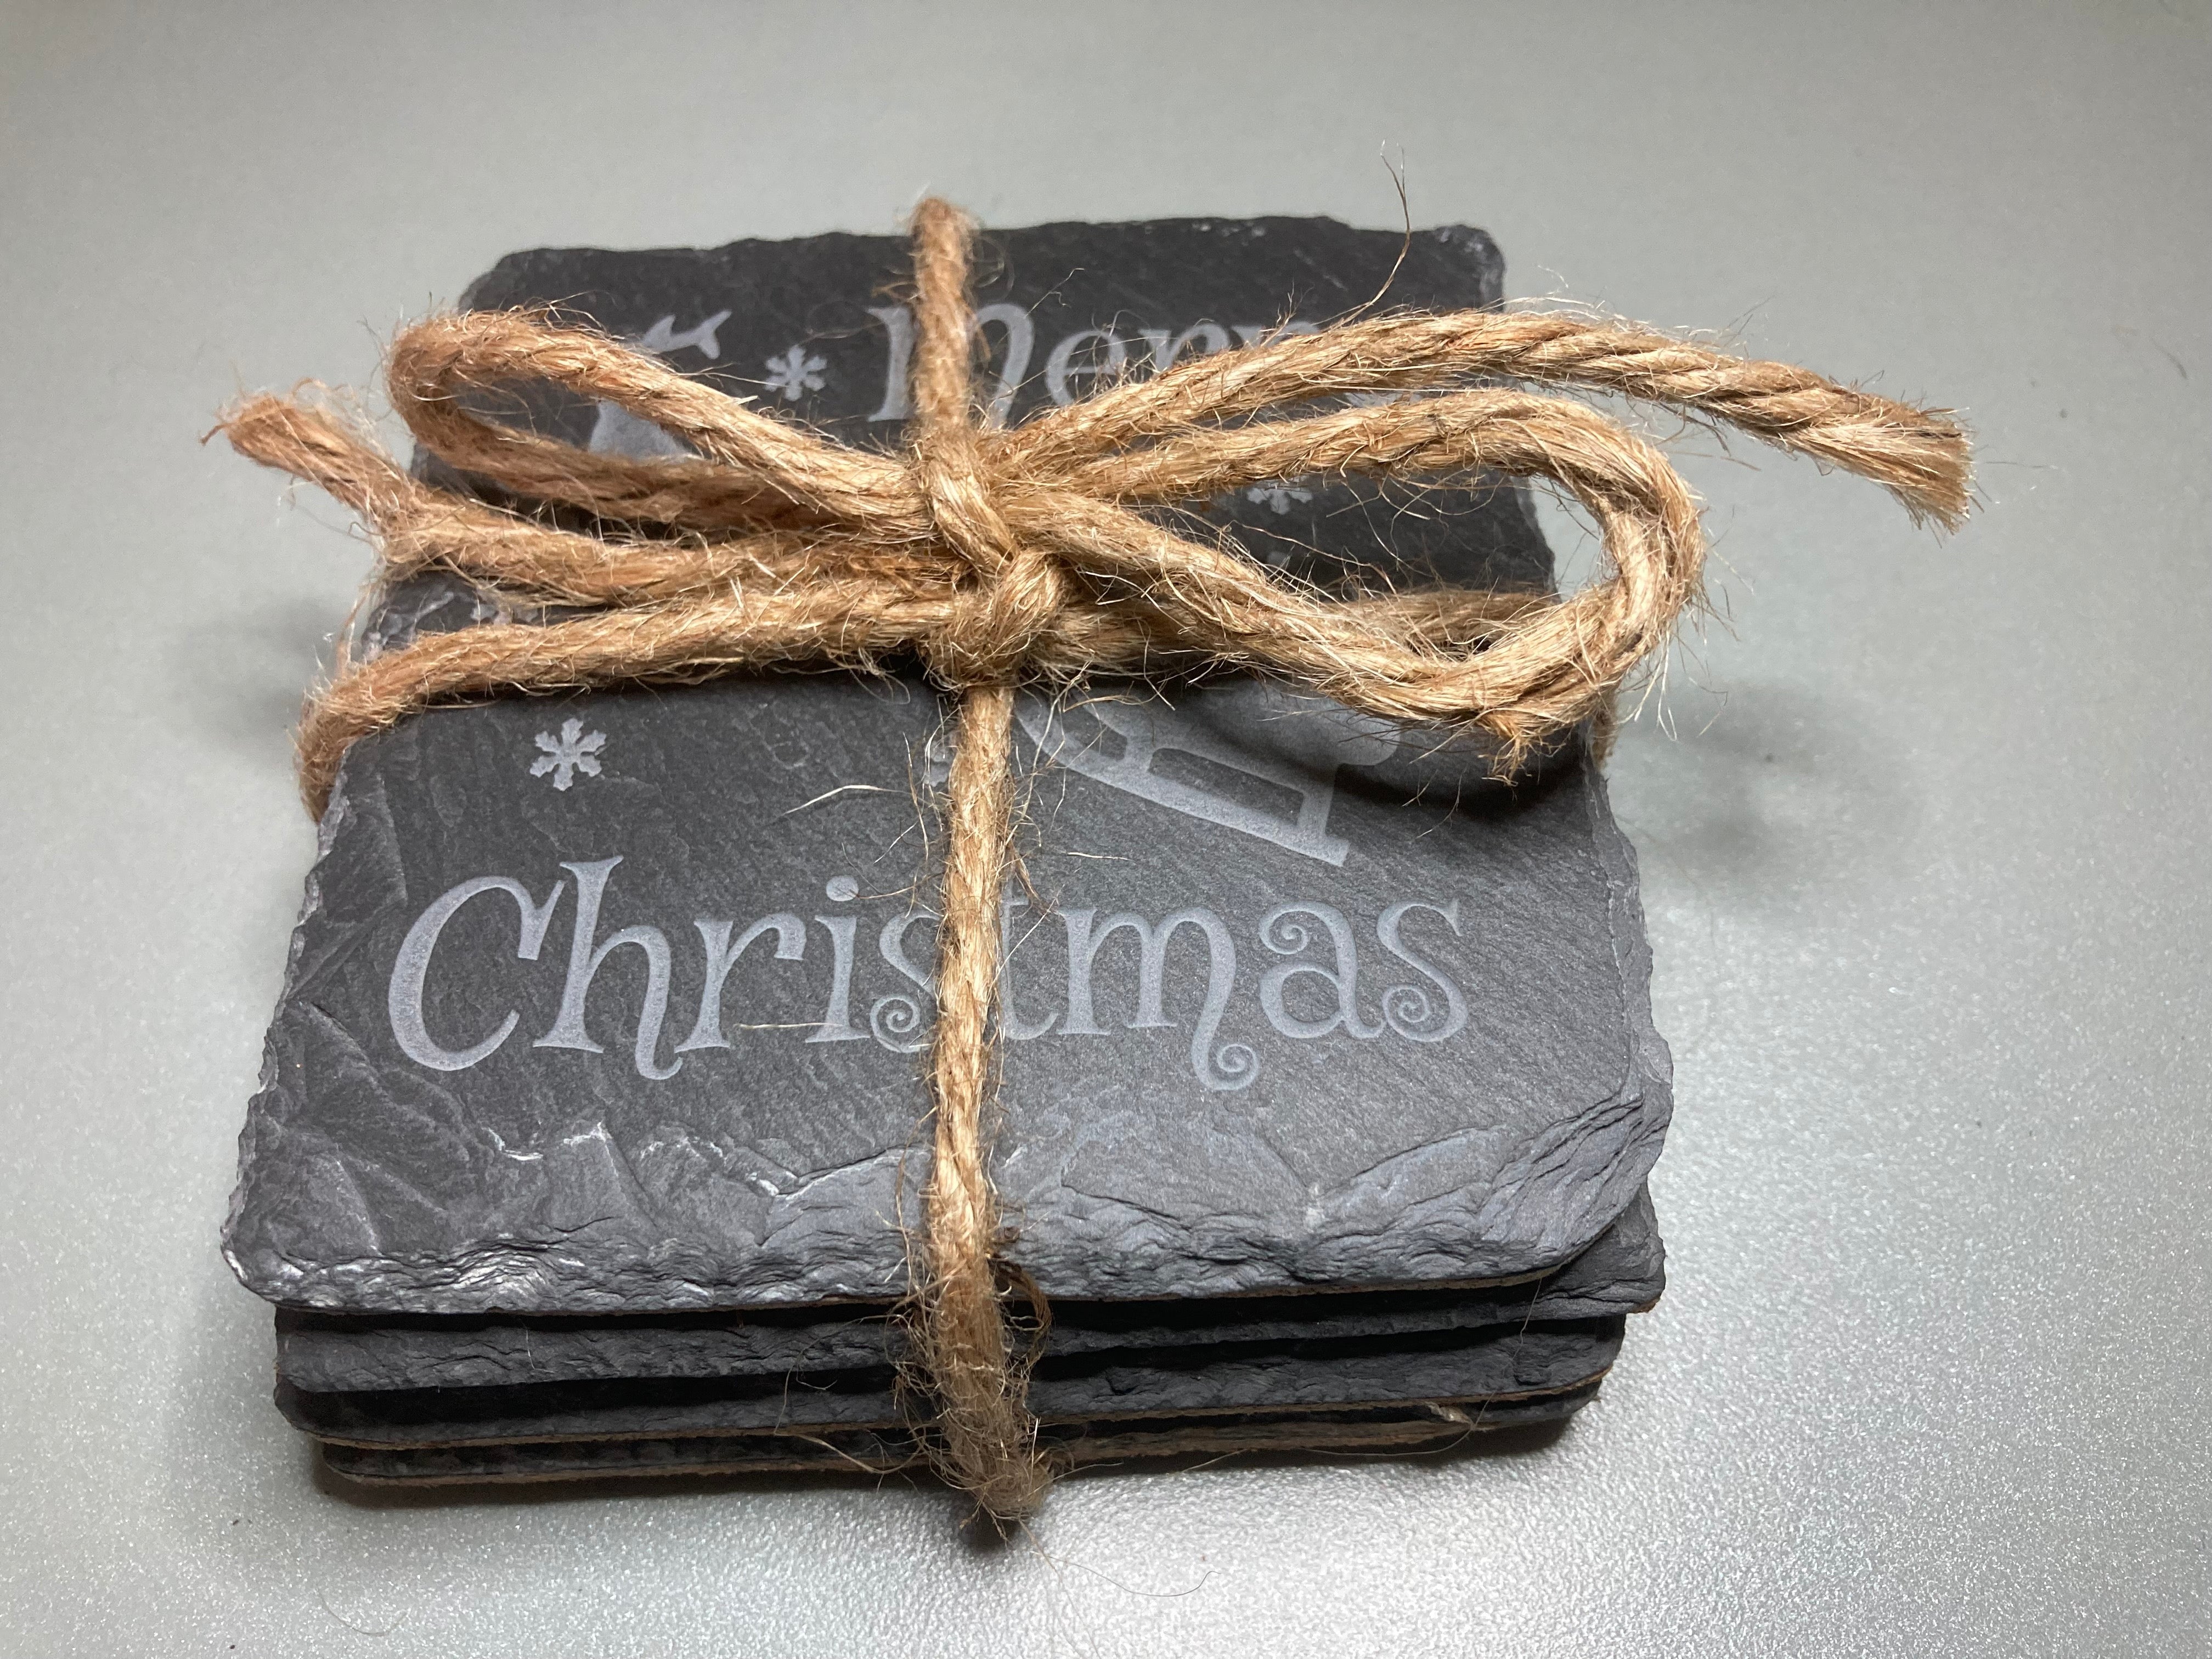 Merry Christmas Coaster. A great gift for the holidays. Get a set for entertaining guests. Carved to a depth and quality that cannot be achieved with simple engraving. Buy as a single, or mix and match in sets of 2 or 4. Add a Coaster Holder and/or Gift Box. Each sold separately.